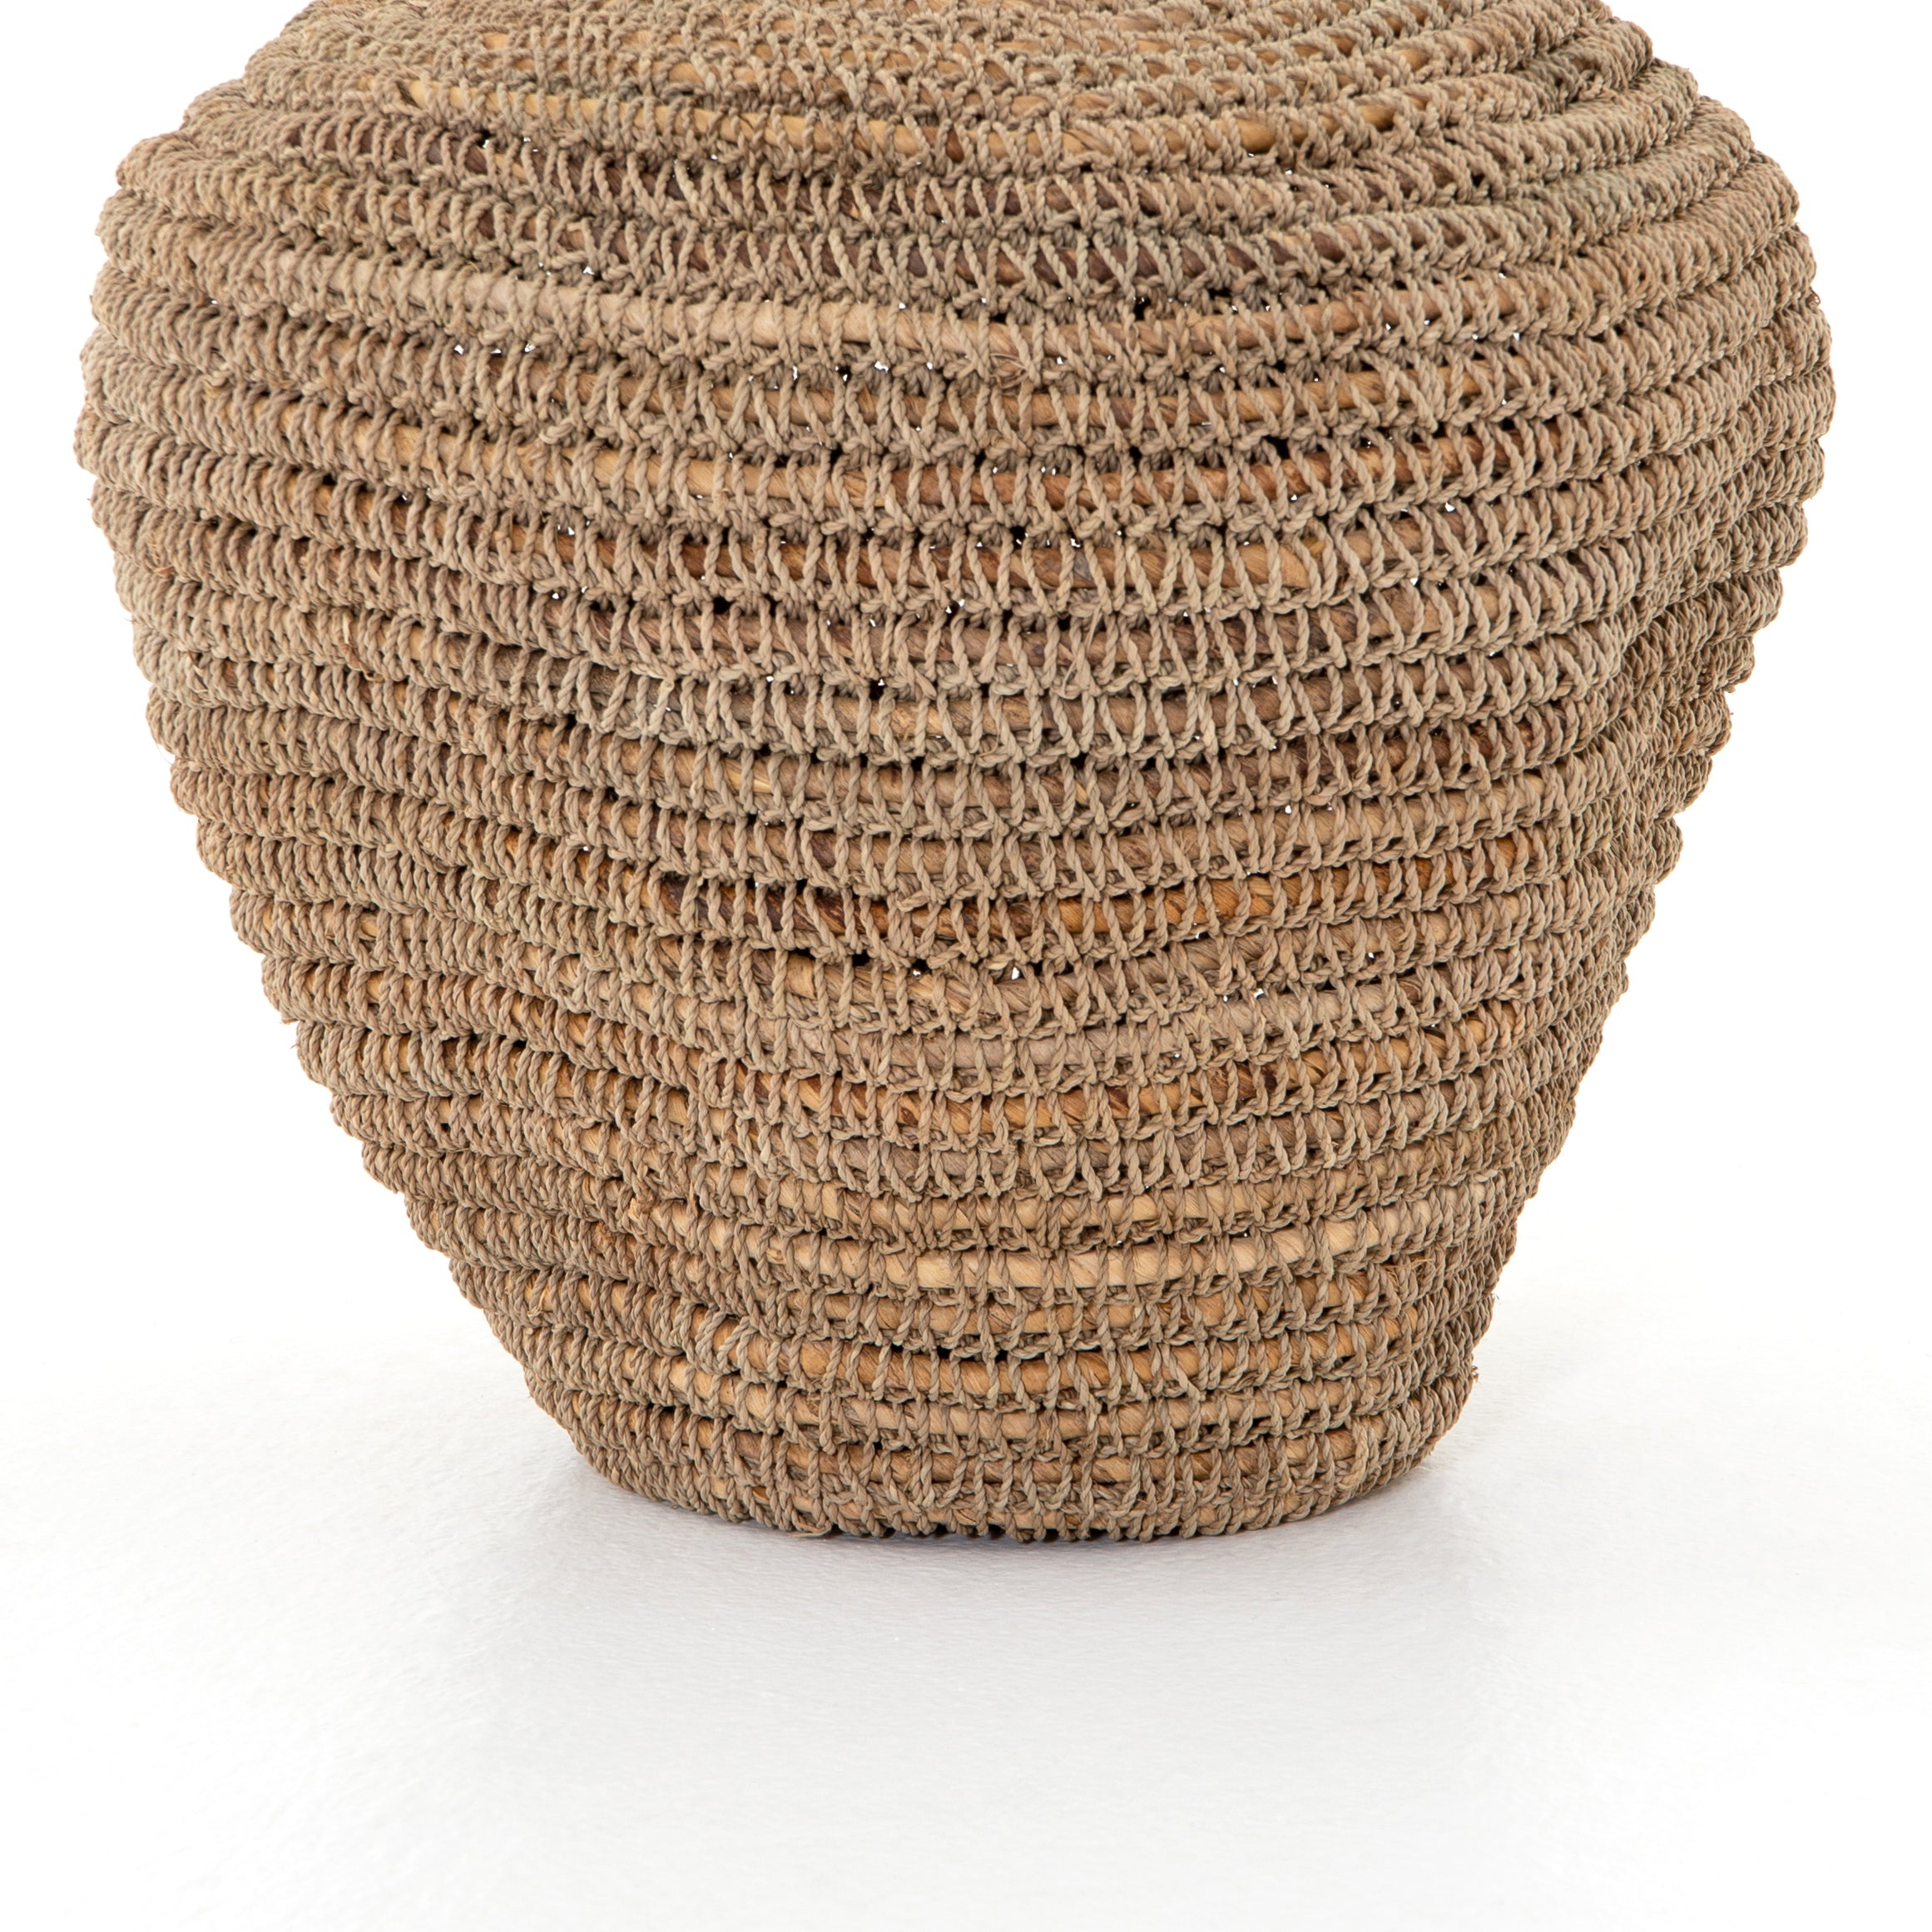 This slouched Bodhi Basket -  Natural has an iron framed wrapped in hand-woven banana leaf. Place on your shelf or in the entryway and bring all the boho vibes to the space.   Overall Dimensions: 15.75"w x 15.75"d x 19.00"h Colors: Black Ink, Natural Banana Leaf Materials: Iron, Banana Leaf